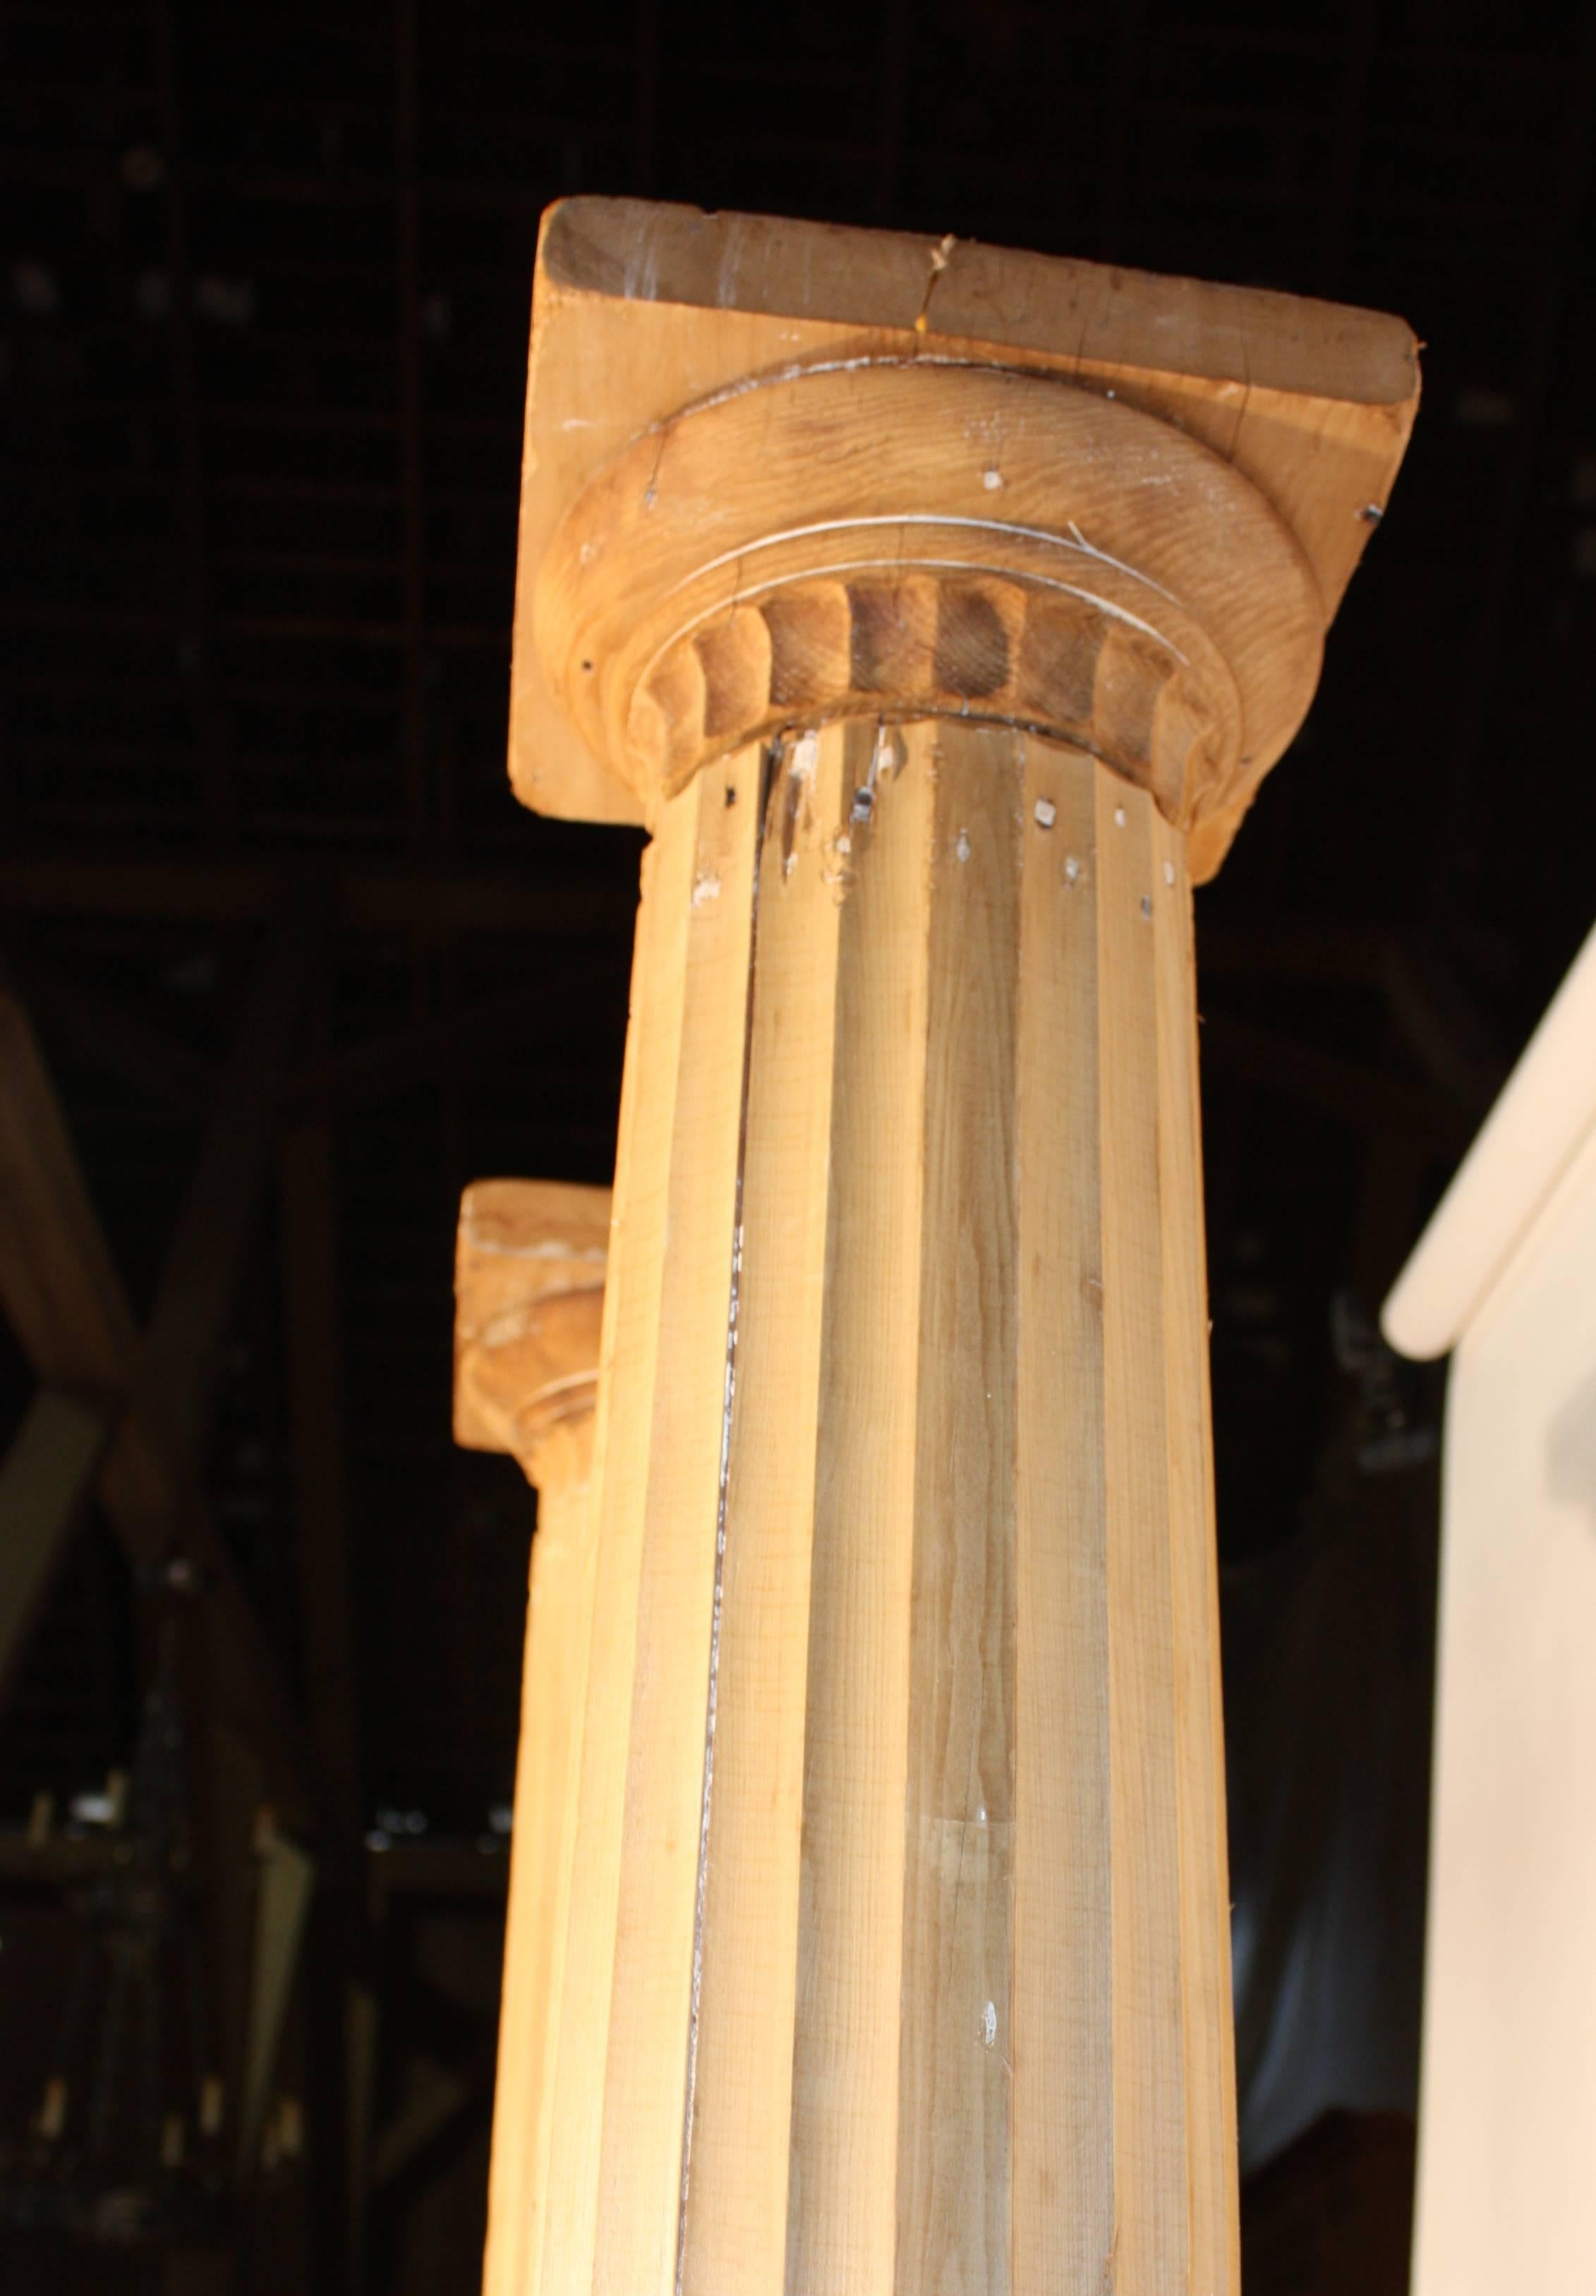 A pair of stripped and bleached pine architectural columns, circa 1870, found in Dutchess County NY, each in two parts, with square pedestal bases and fluted upper section.